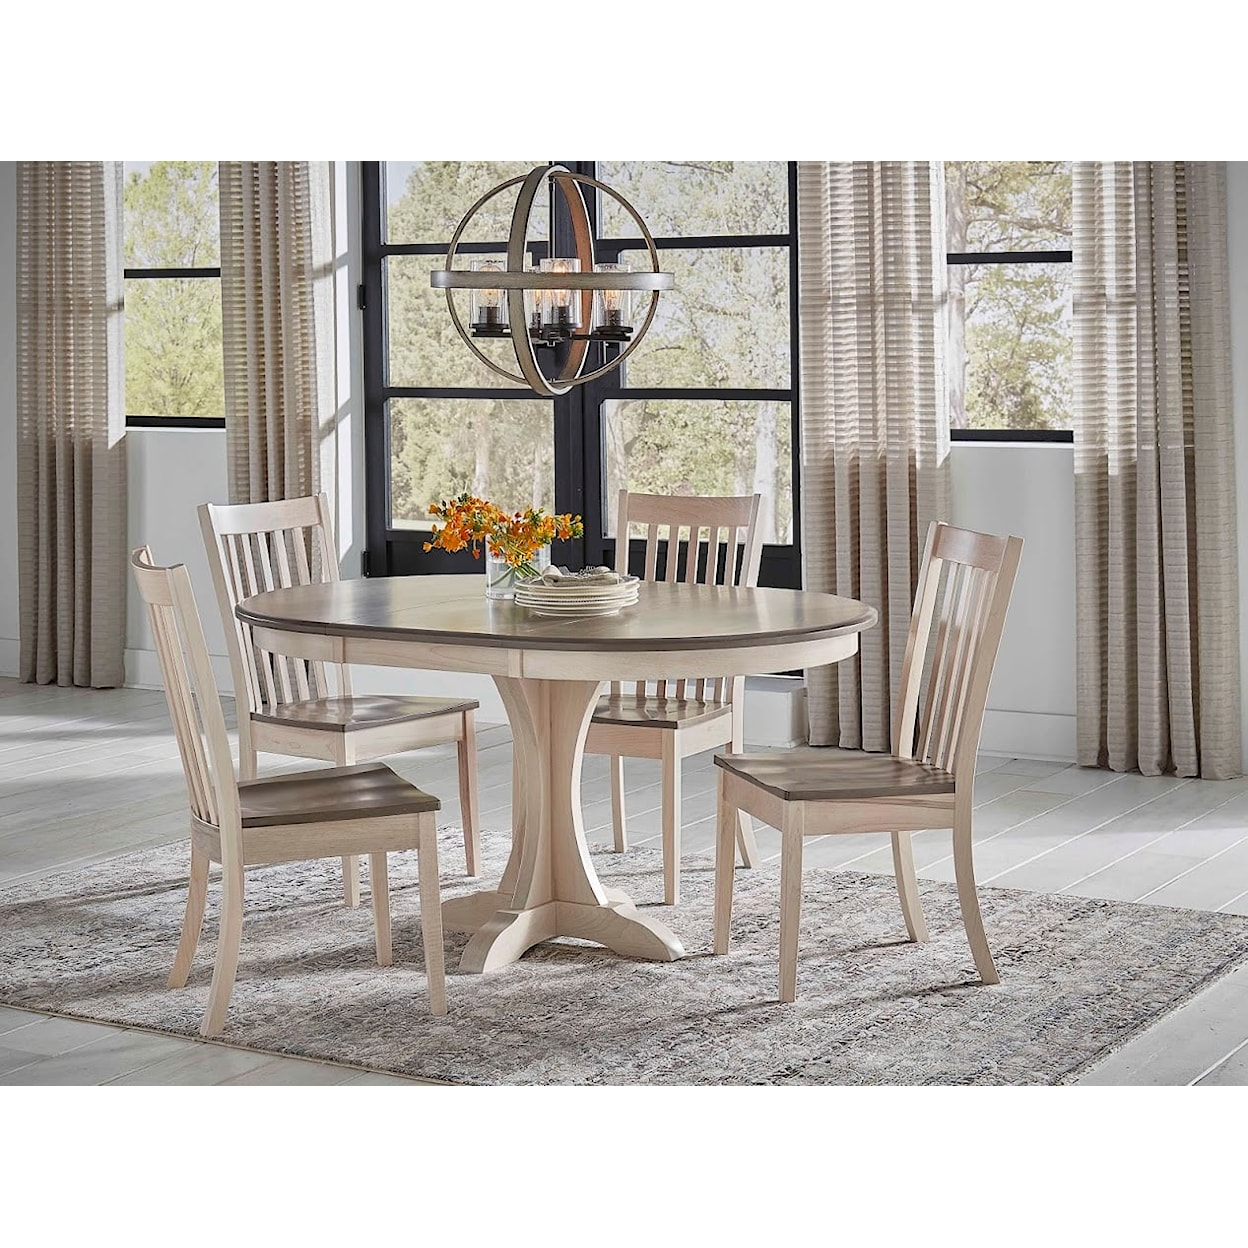 Archbold Furniture Amish Essentials Casual Dining 5-Piece Dining Set